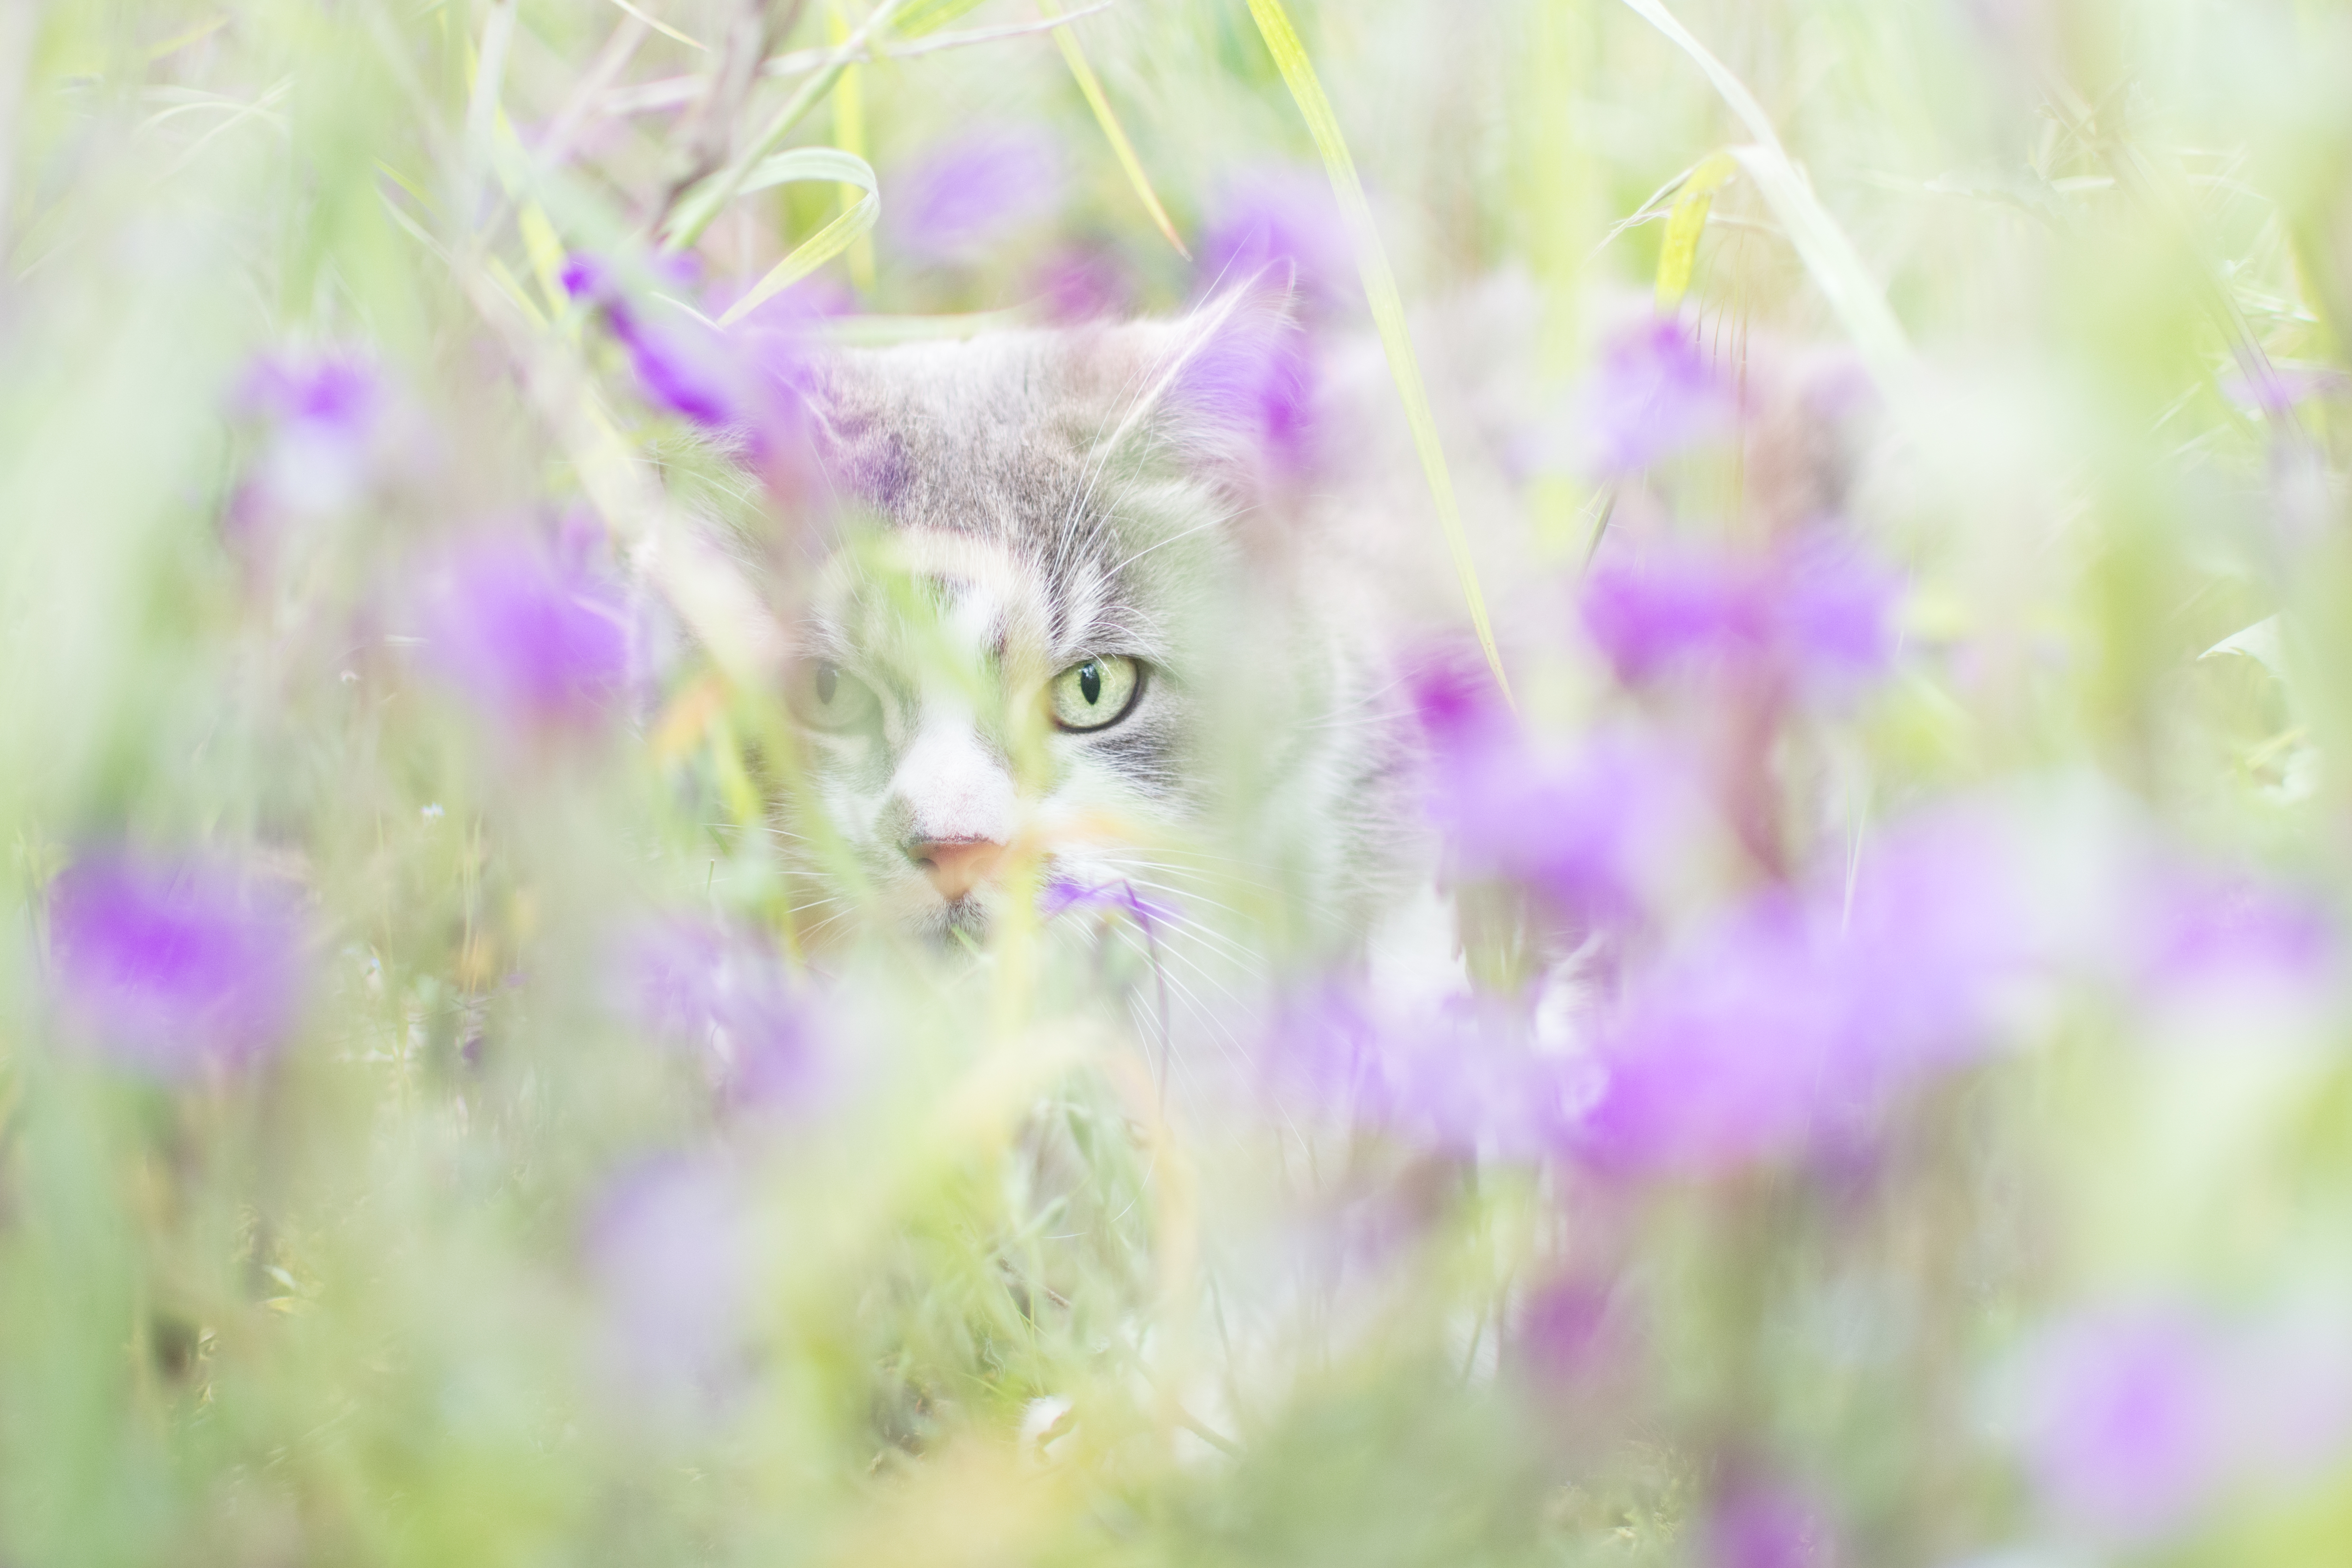 Wallpapers cat nature animal on the desktop